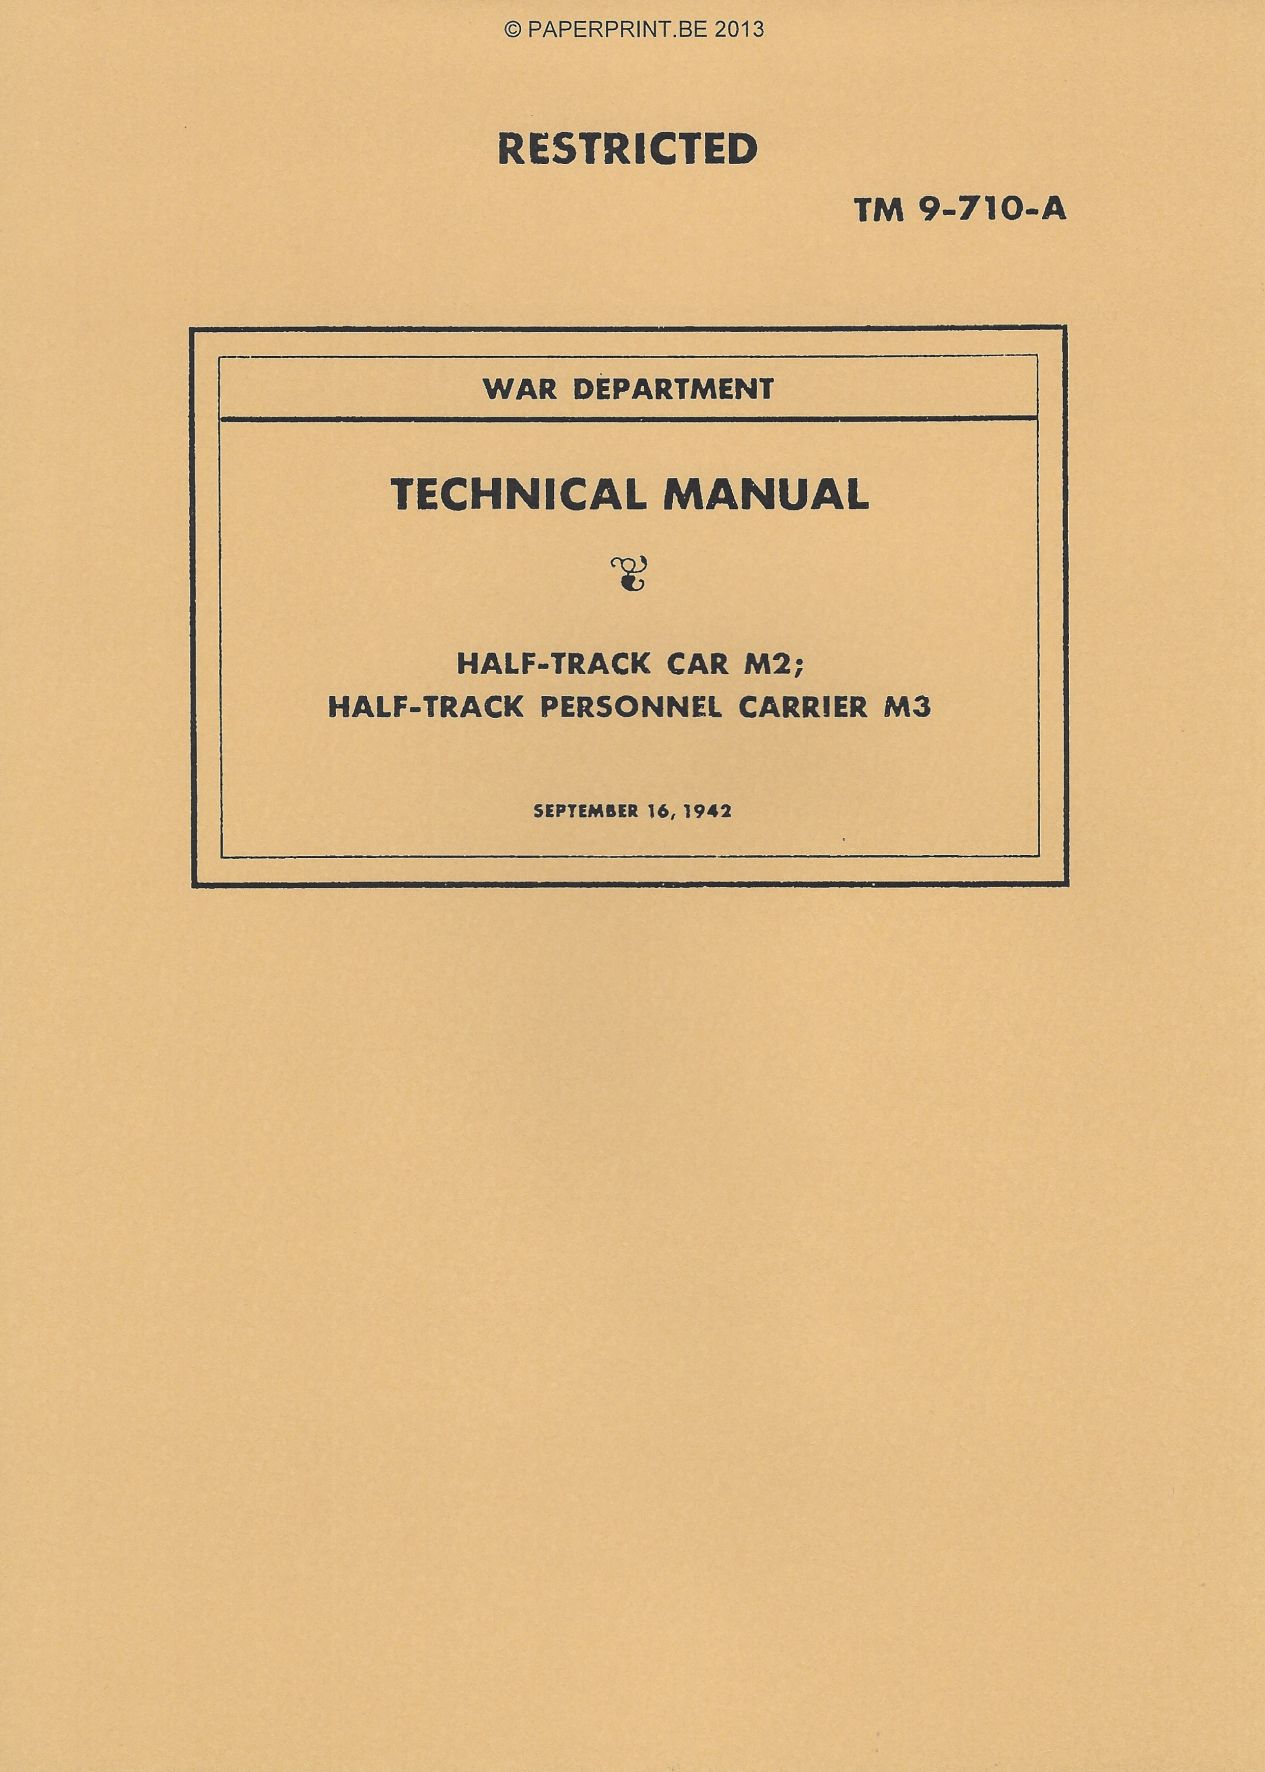 TM 9-710-A US HALF TRACK CAR M2 AND PESONNEL CARRIER M3 MANUAL